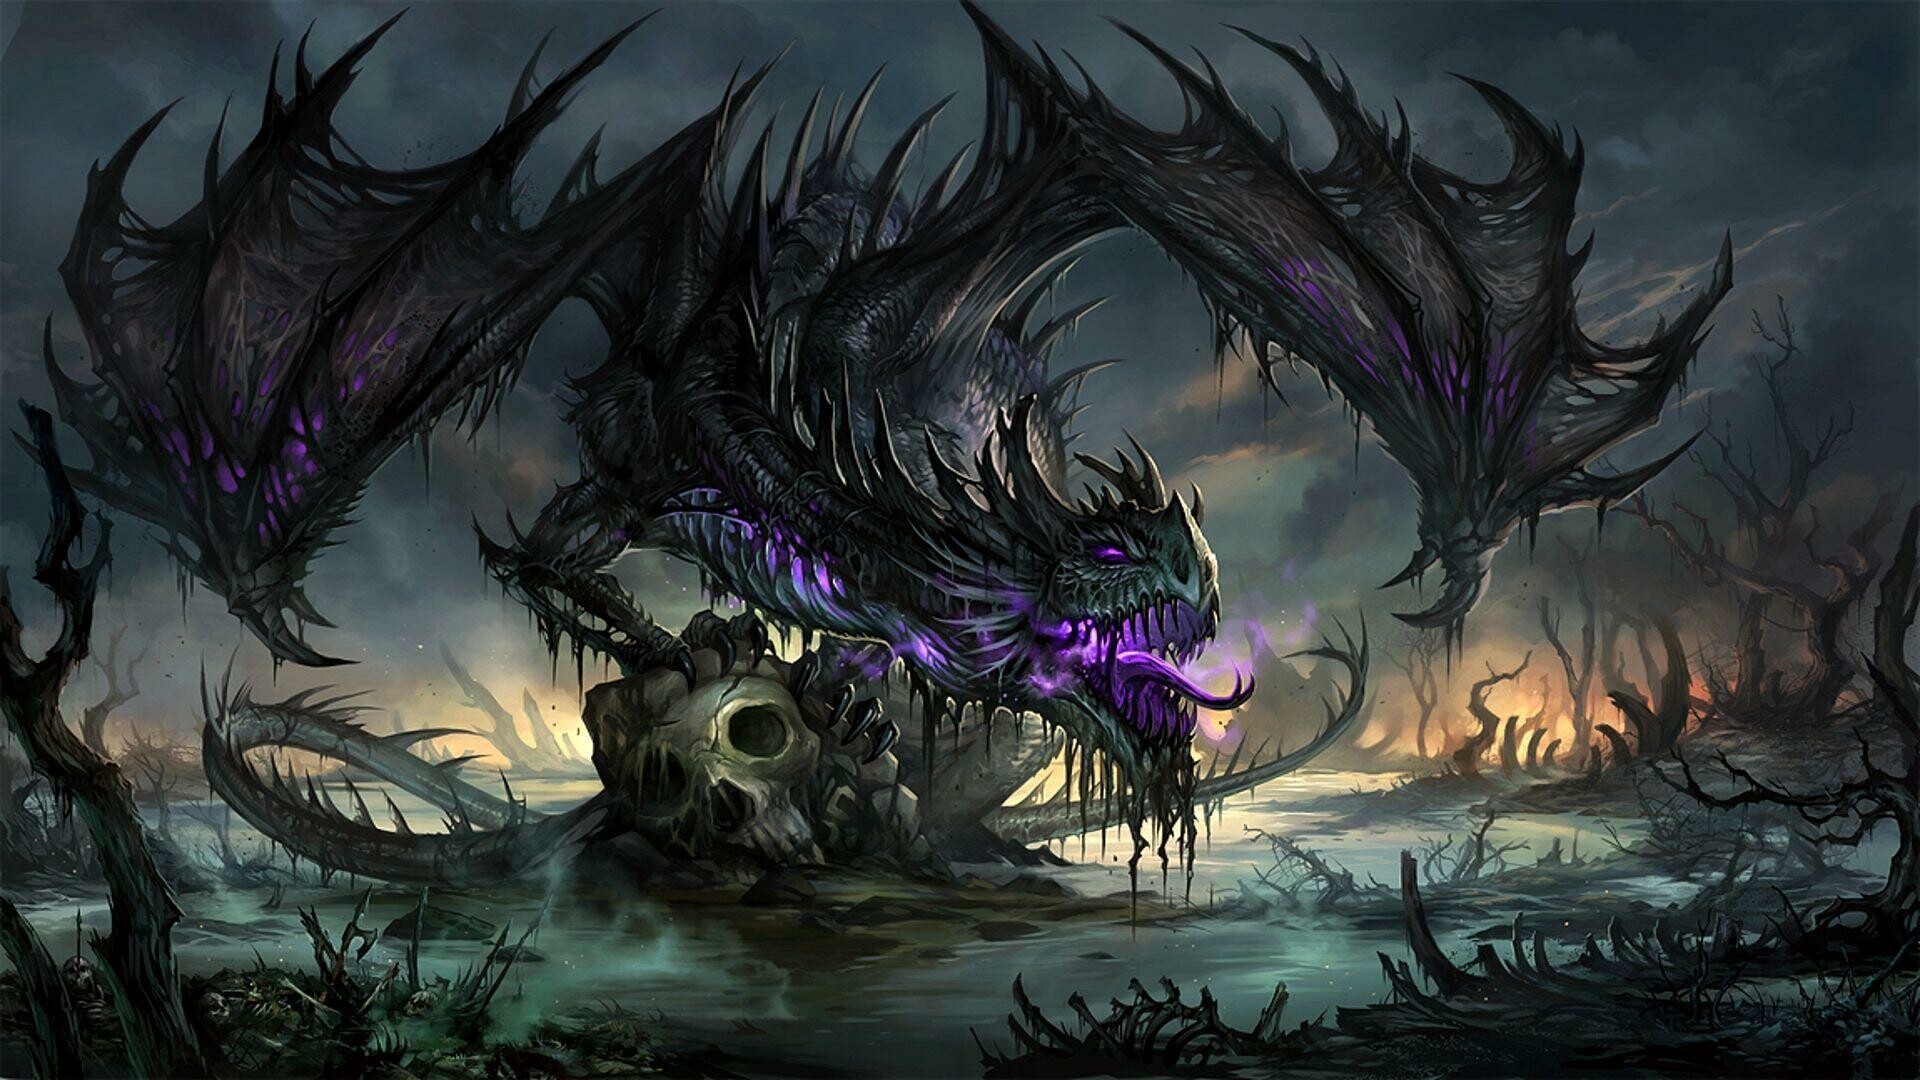 Dragon: A mythical and legendary creature from the reptile family, Evil reputation. 1920x1080 Full HD Wallpaper.